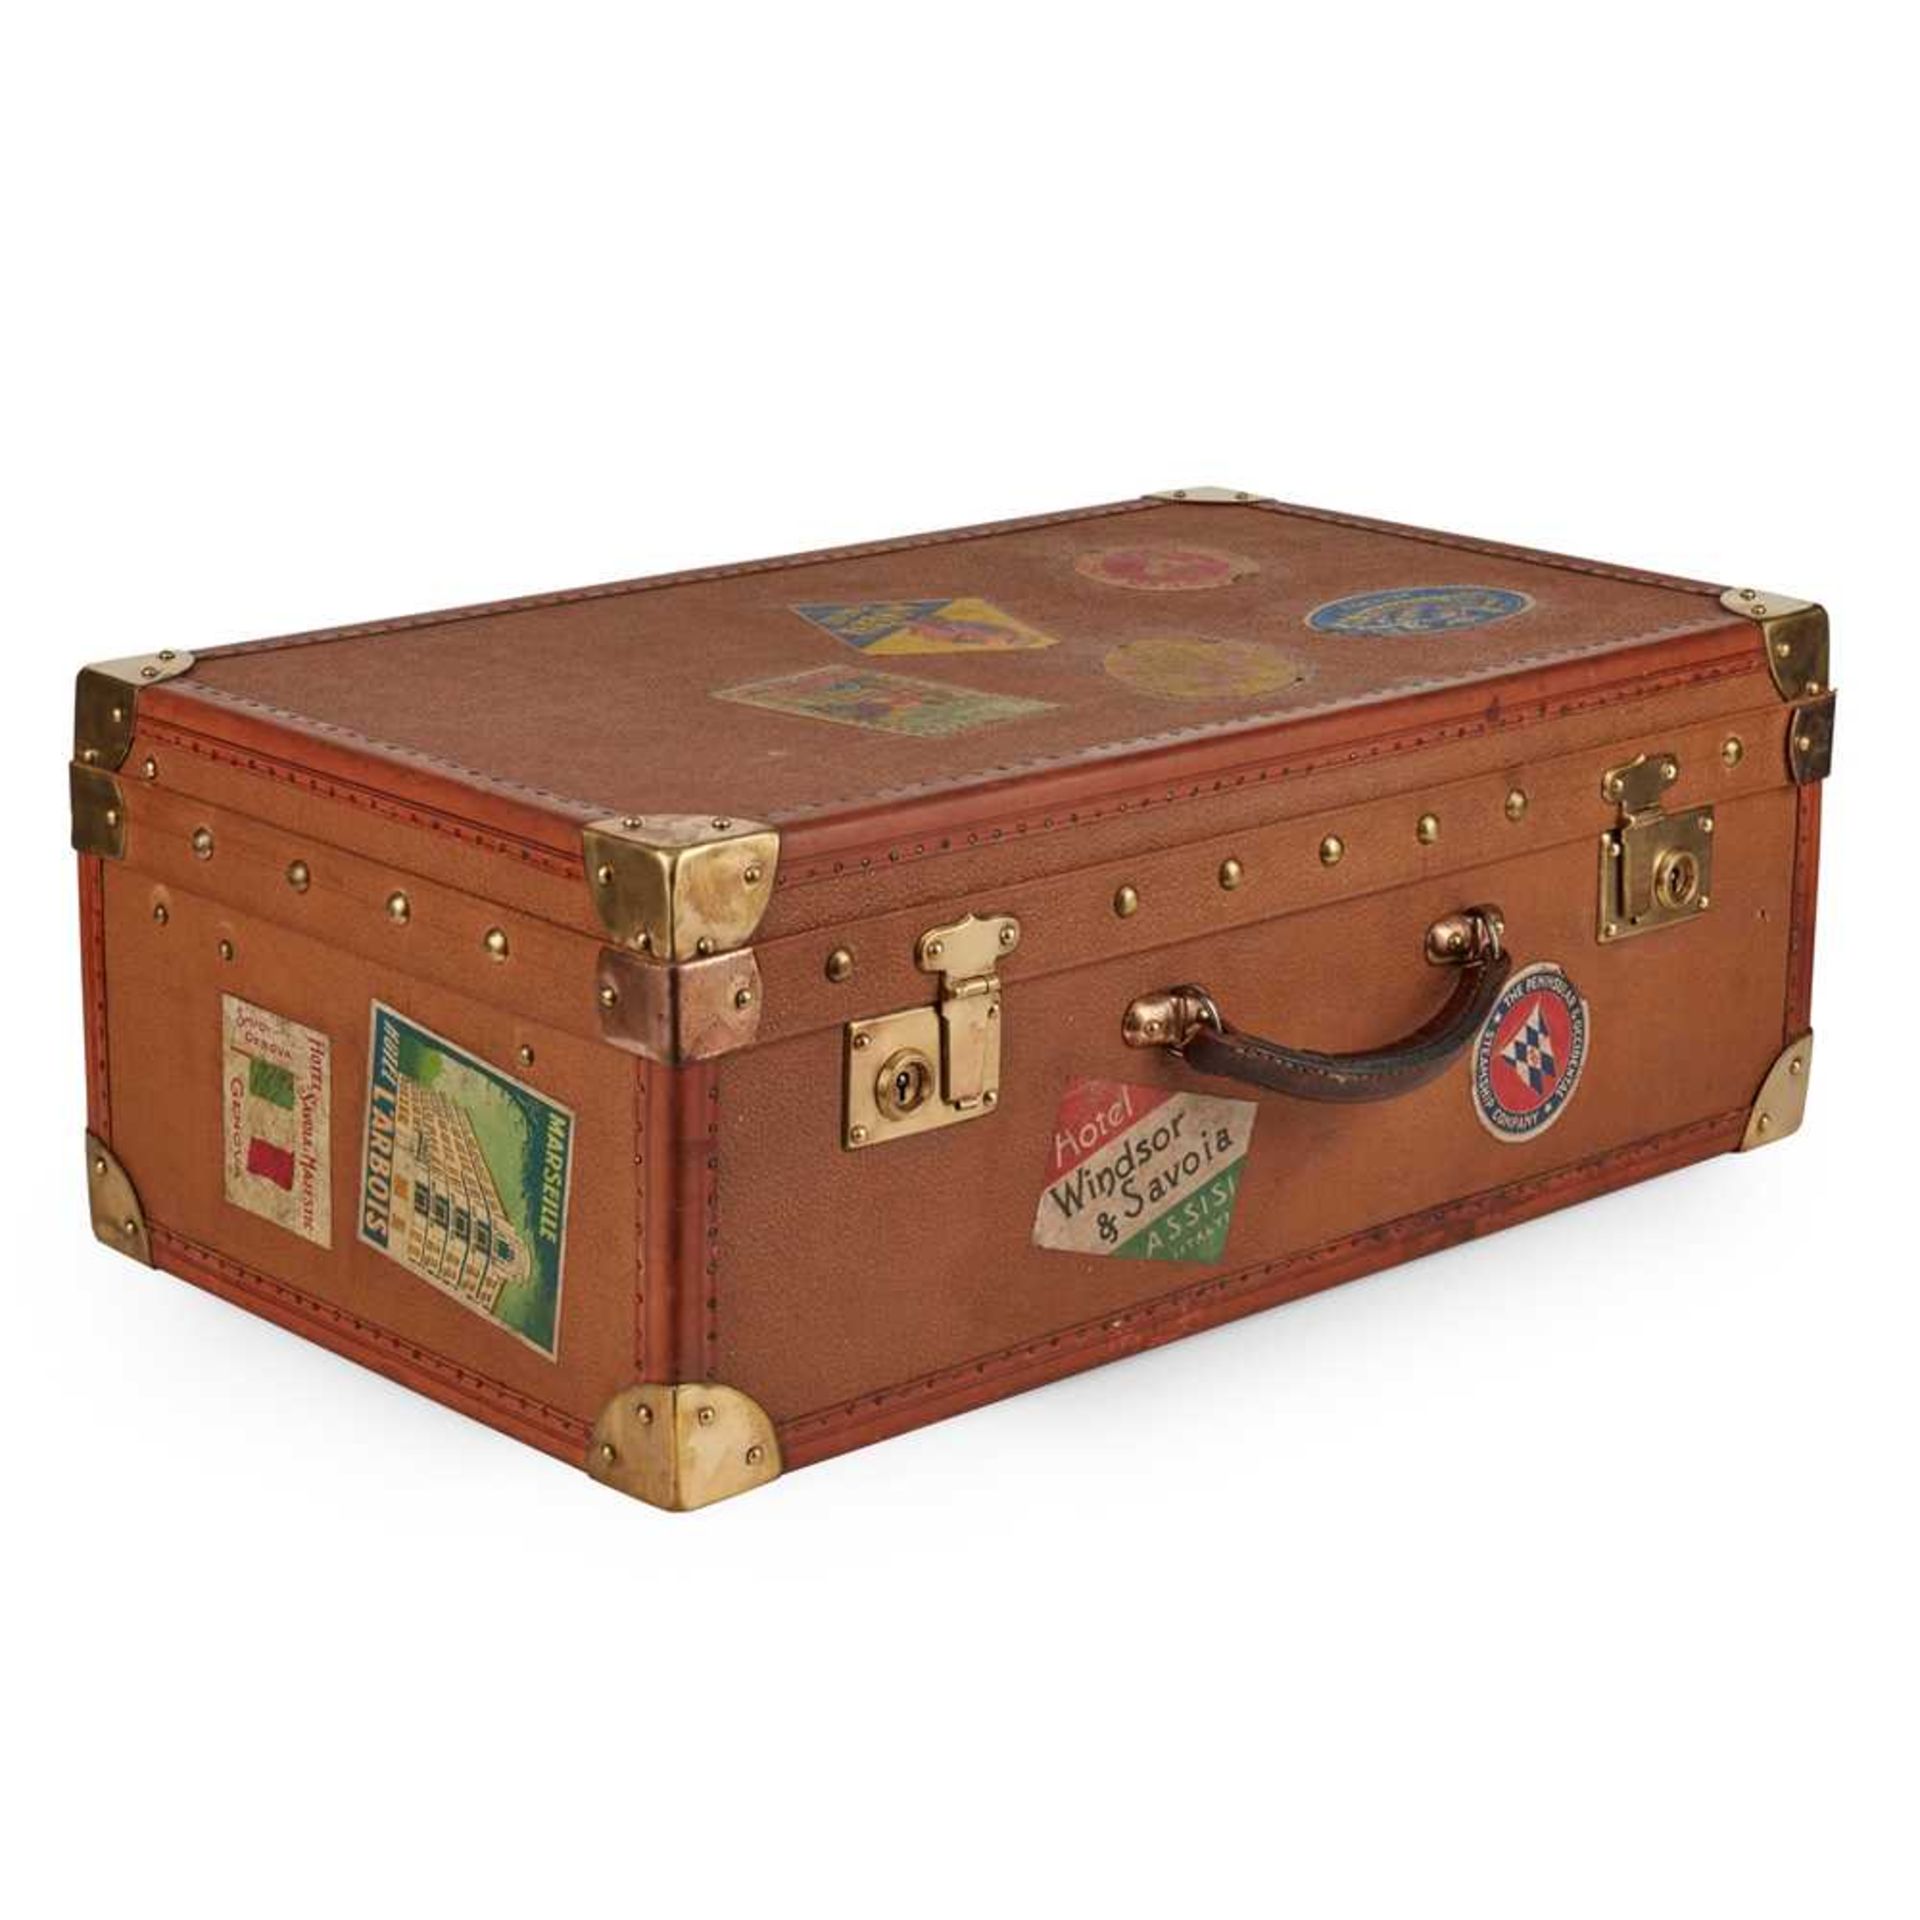 FRENCH LEATHER AND BRASS BOUND CANVAS SUITCASE CIRCA 1920 - Image 2 of 3